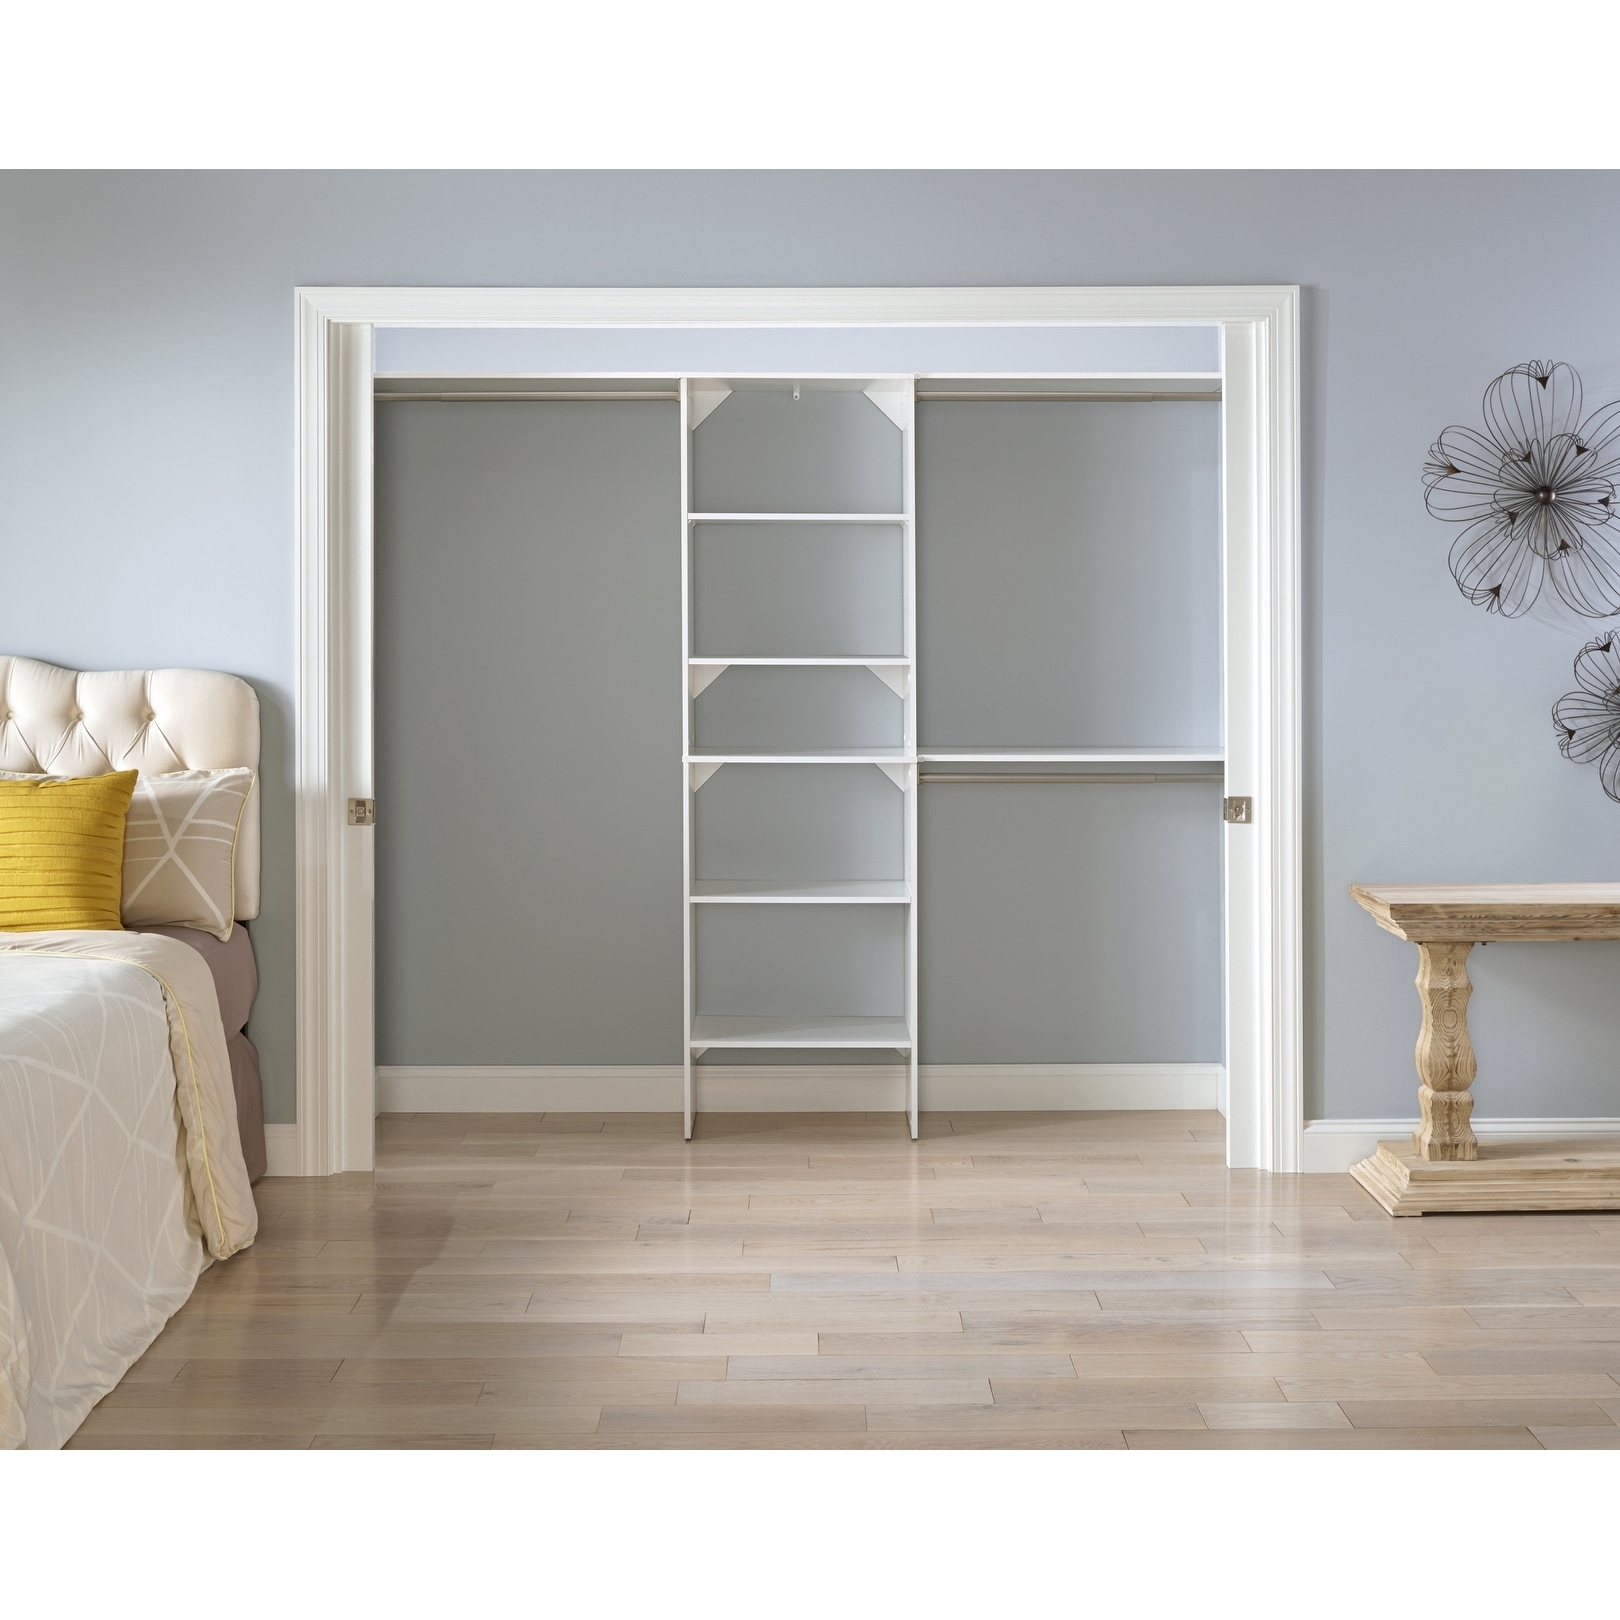 https://ak1.ostkcdn.com/images/products/is/images/direct/acc99ddabe88a1b2fb0e2401fe05b3115d2c5fcd/ClosetMaid-SuiteSymphony-25-in.-Closet-Organizer-with-Shelves.jpg